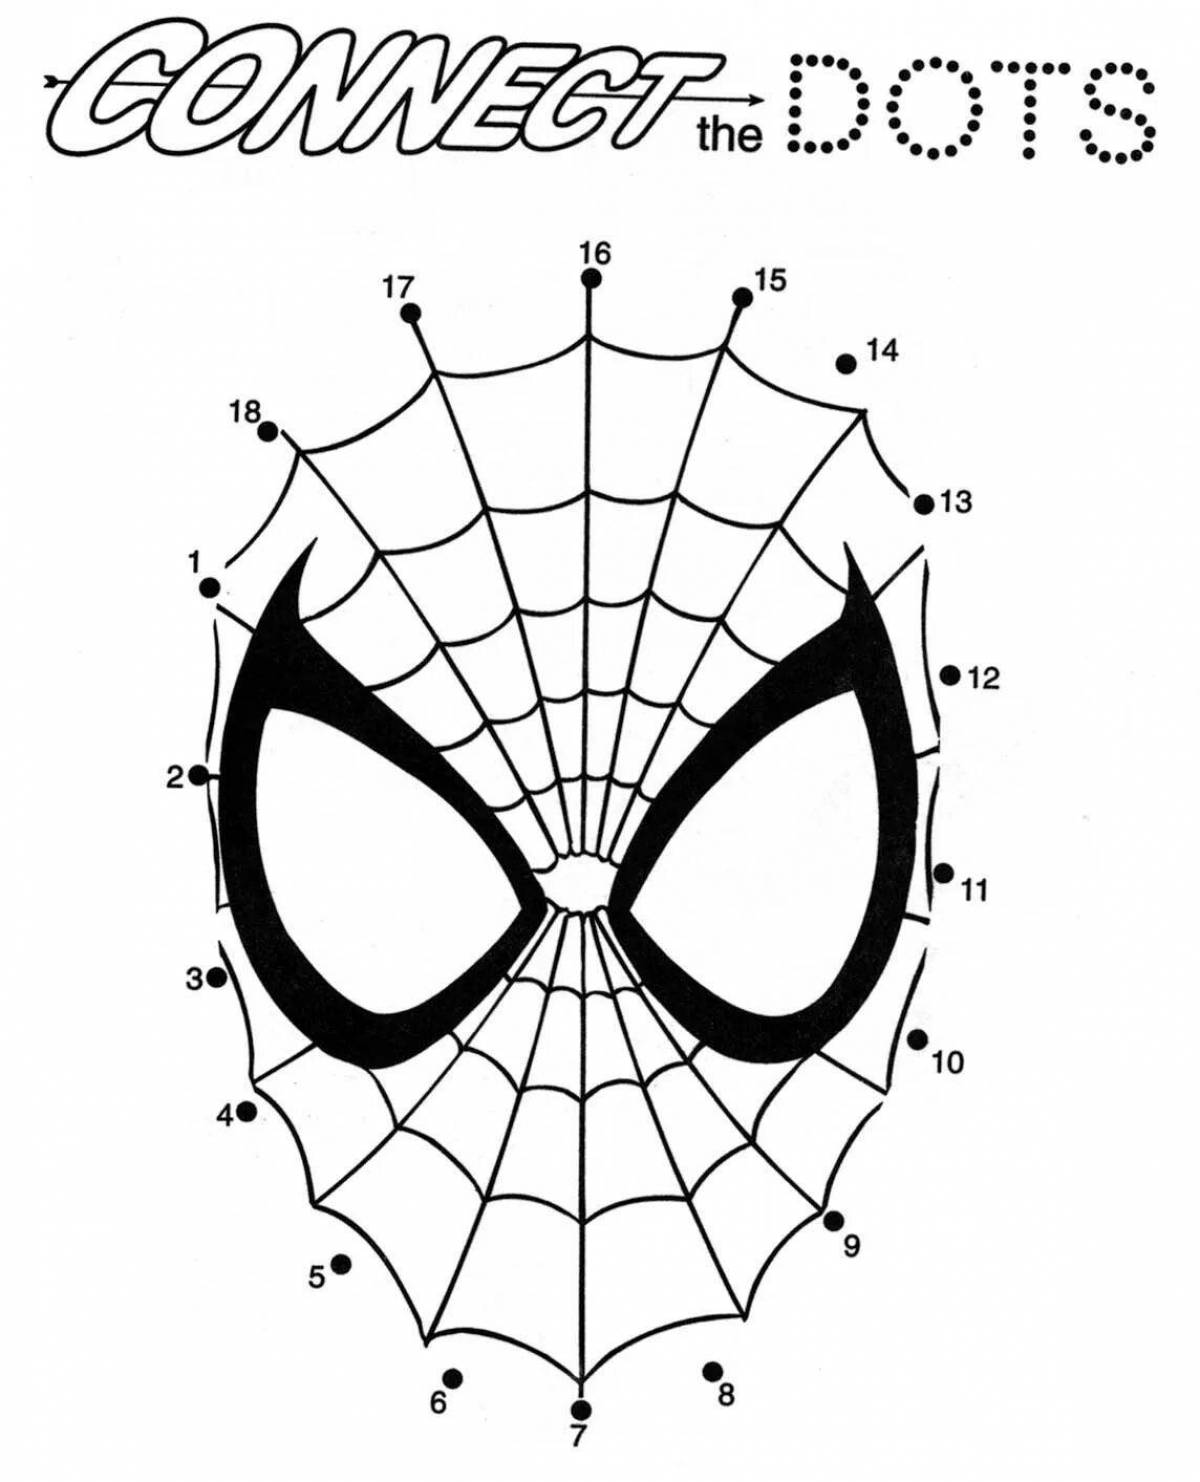 Adorable Spiderman coloring by numbers